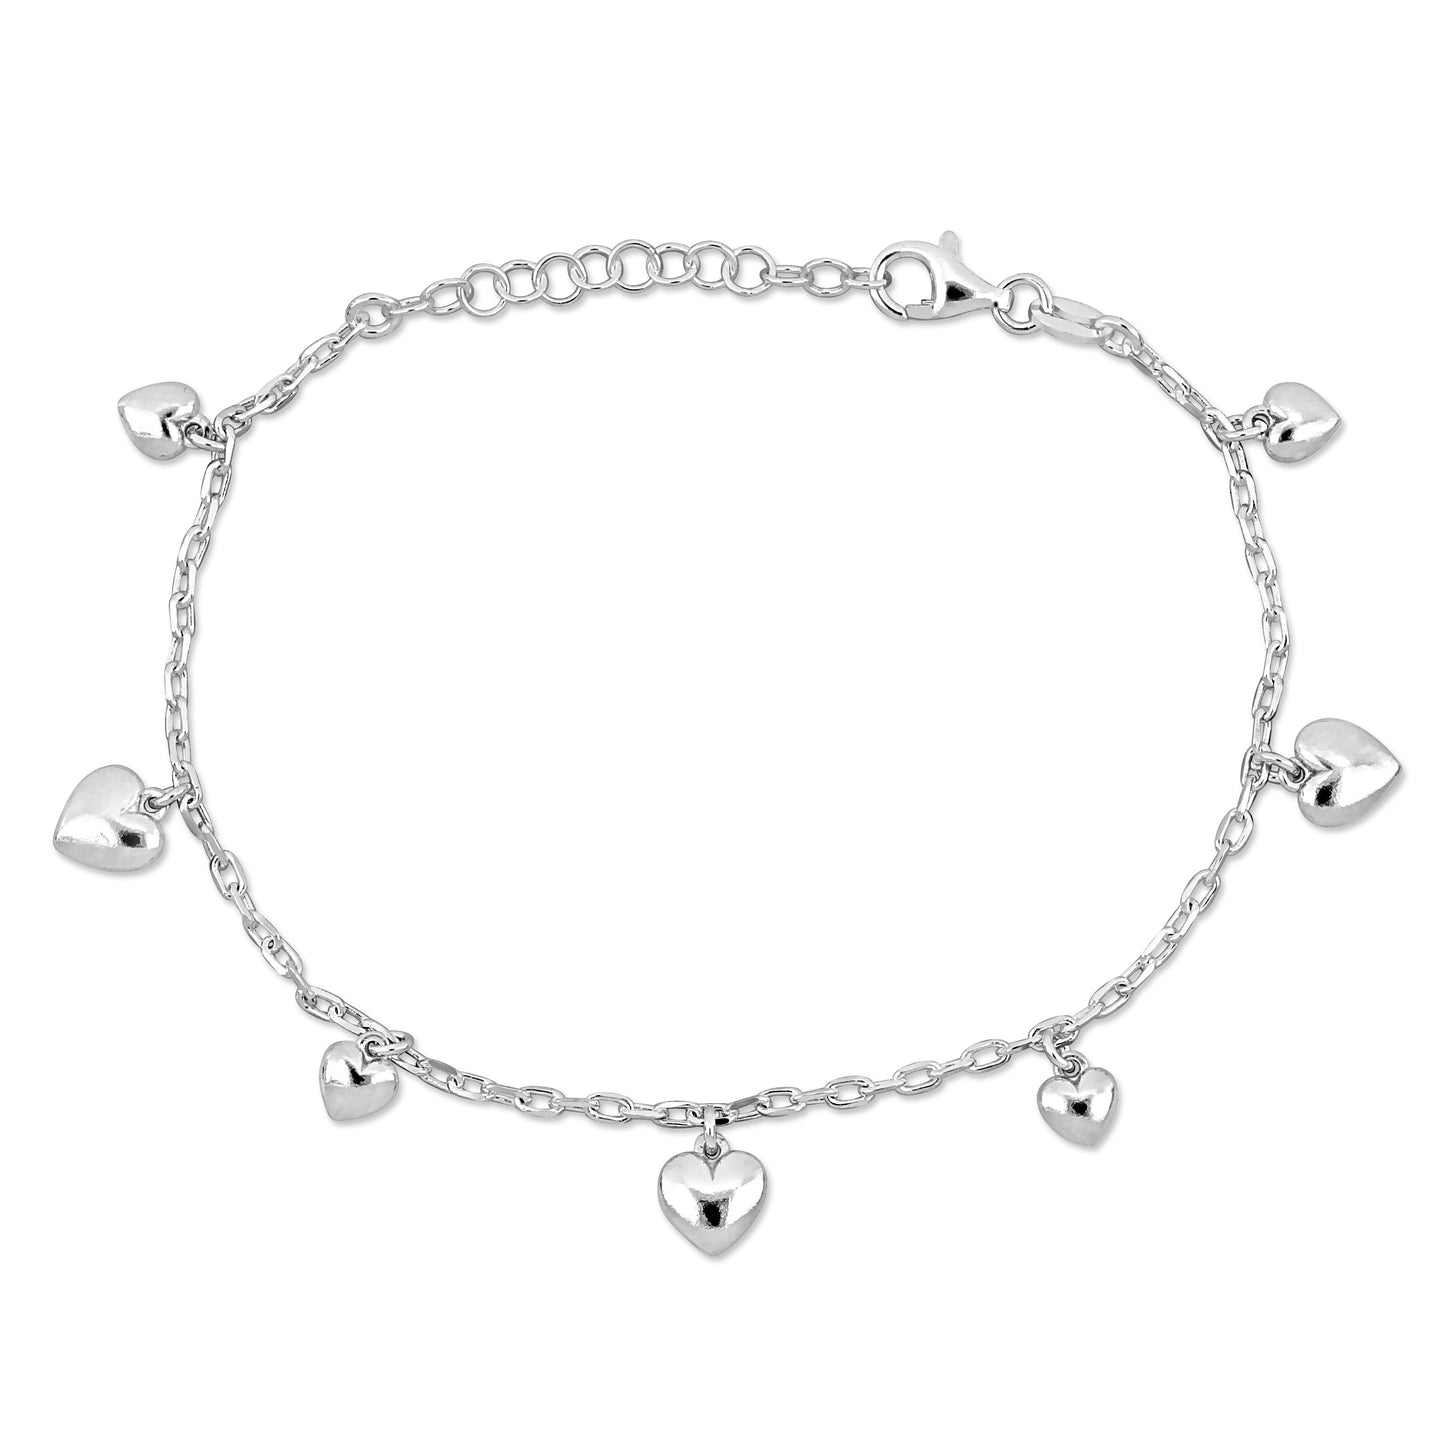 KIDS/TEEN Silver White 7 Heart Charm Bracelet On diamond Cut Cable Chain w/lobster clasp Length (inches): 6.5+1 ext.